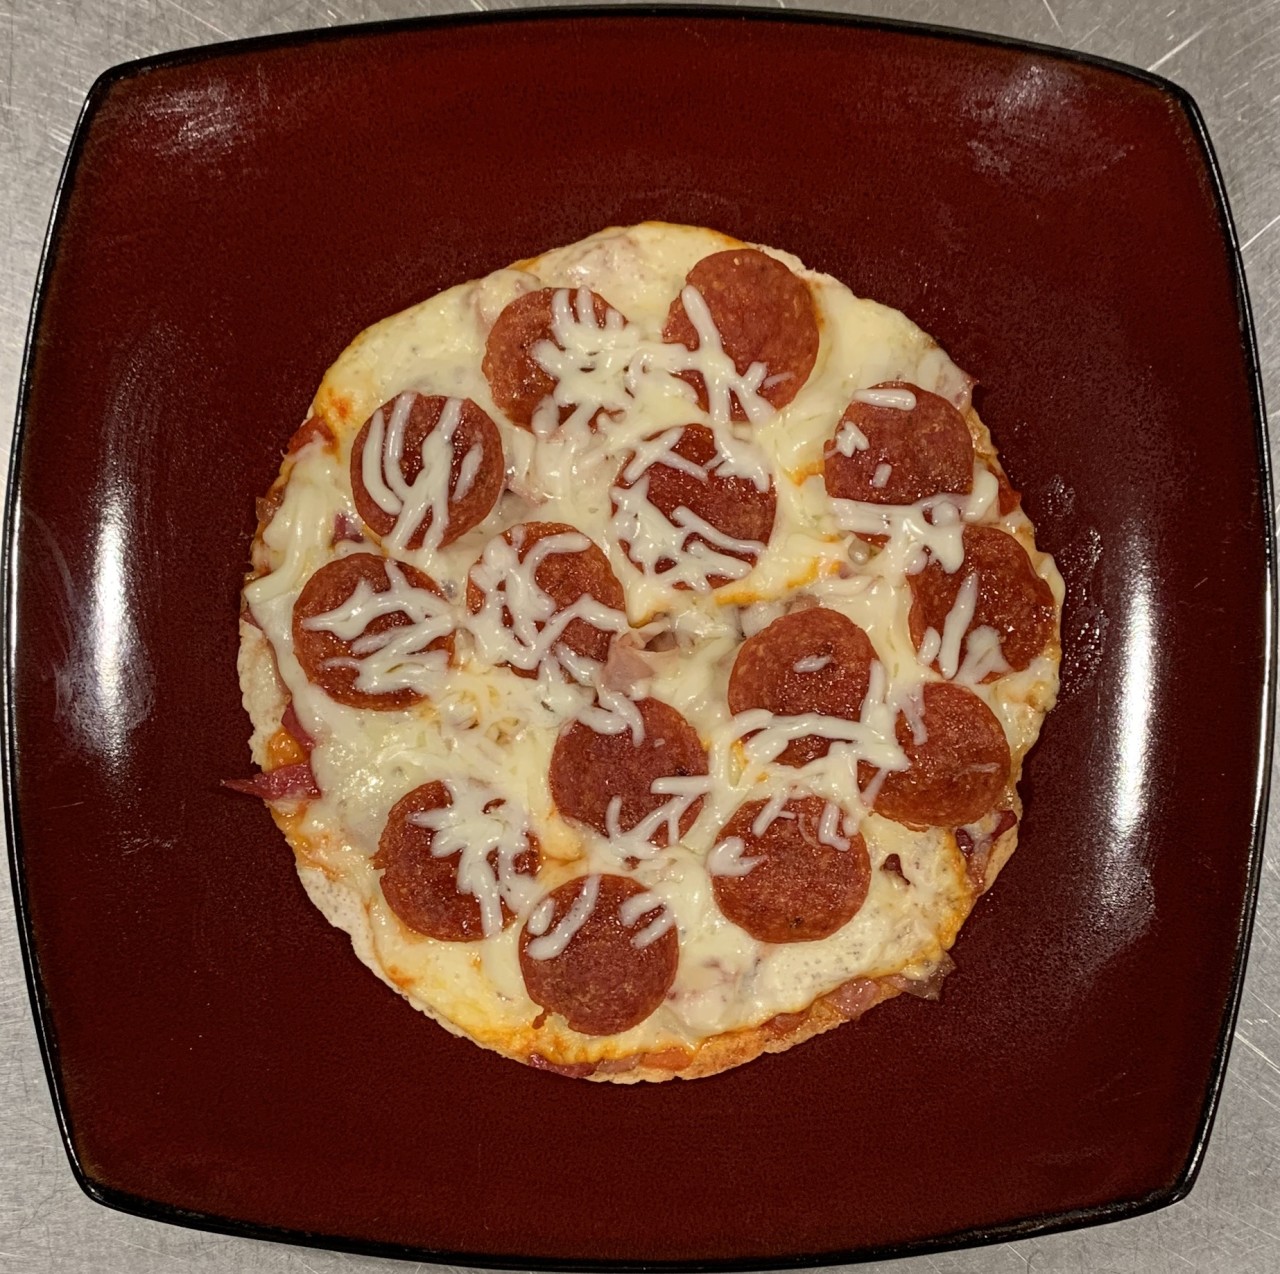 <a class="bx-tag" rel="tag" href="https://streetloc.com/view-channel-profile/whatsforlunch"><s>#</s><b>whatsforlunch</b></a> Low Carb Tortilla Pizza